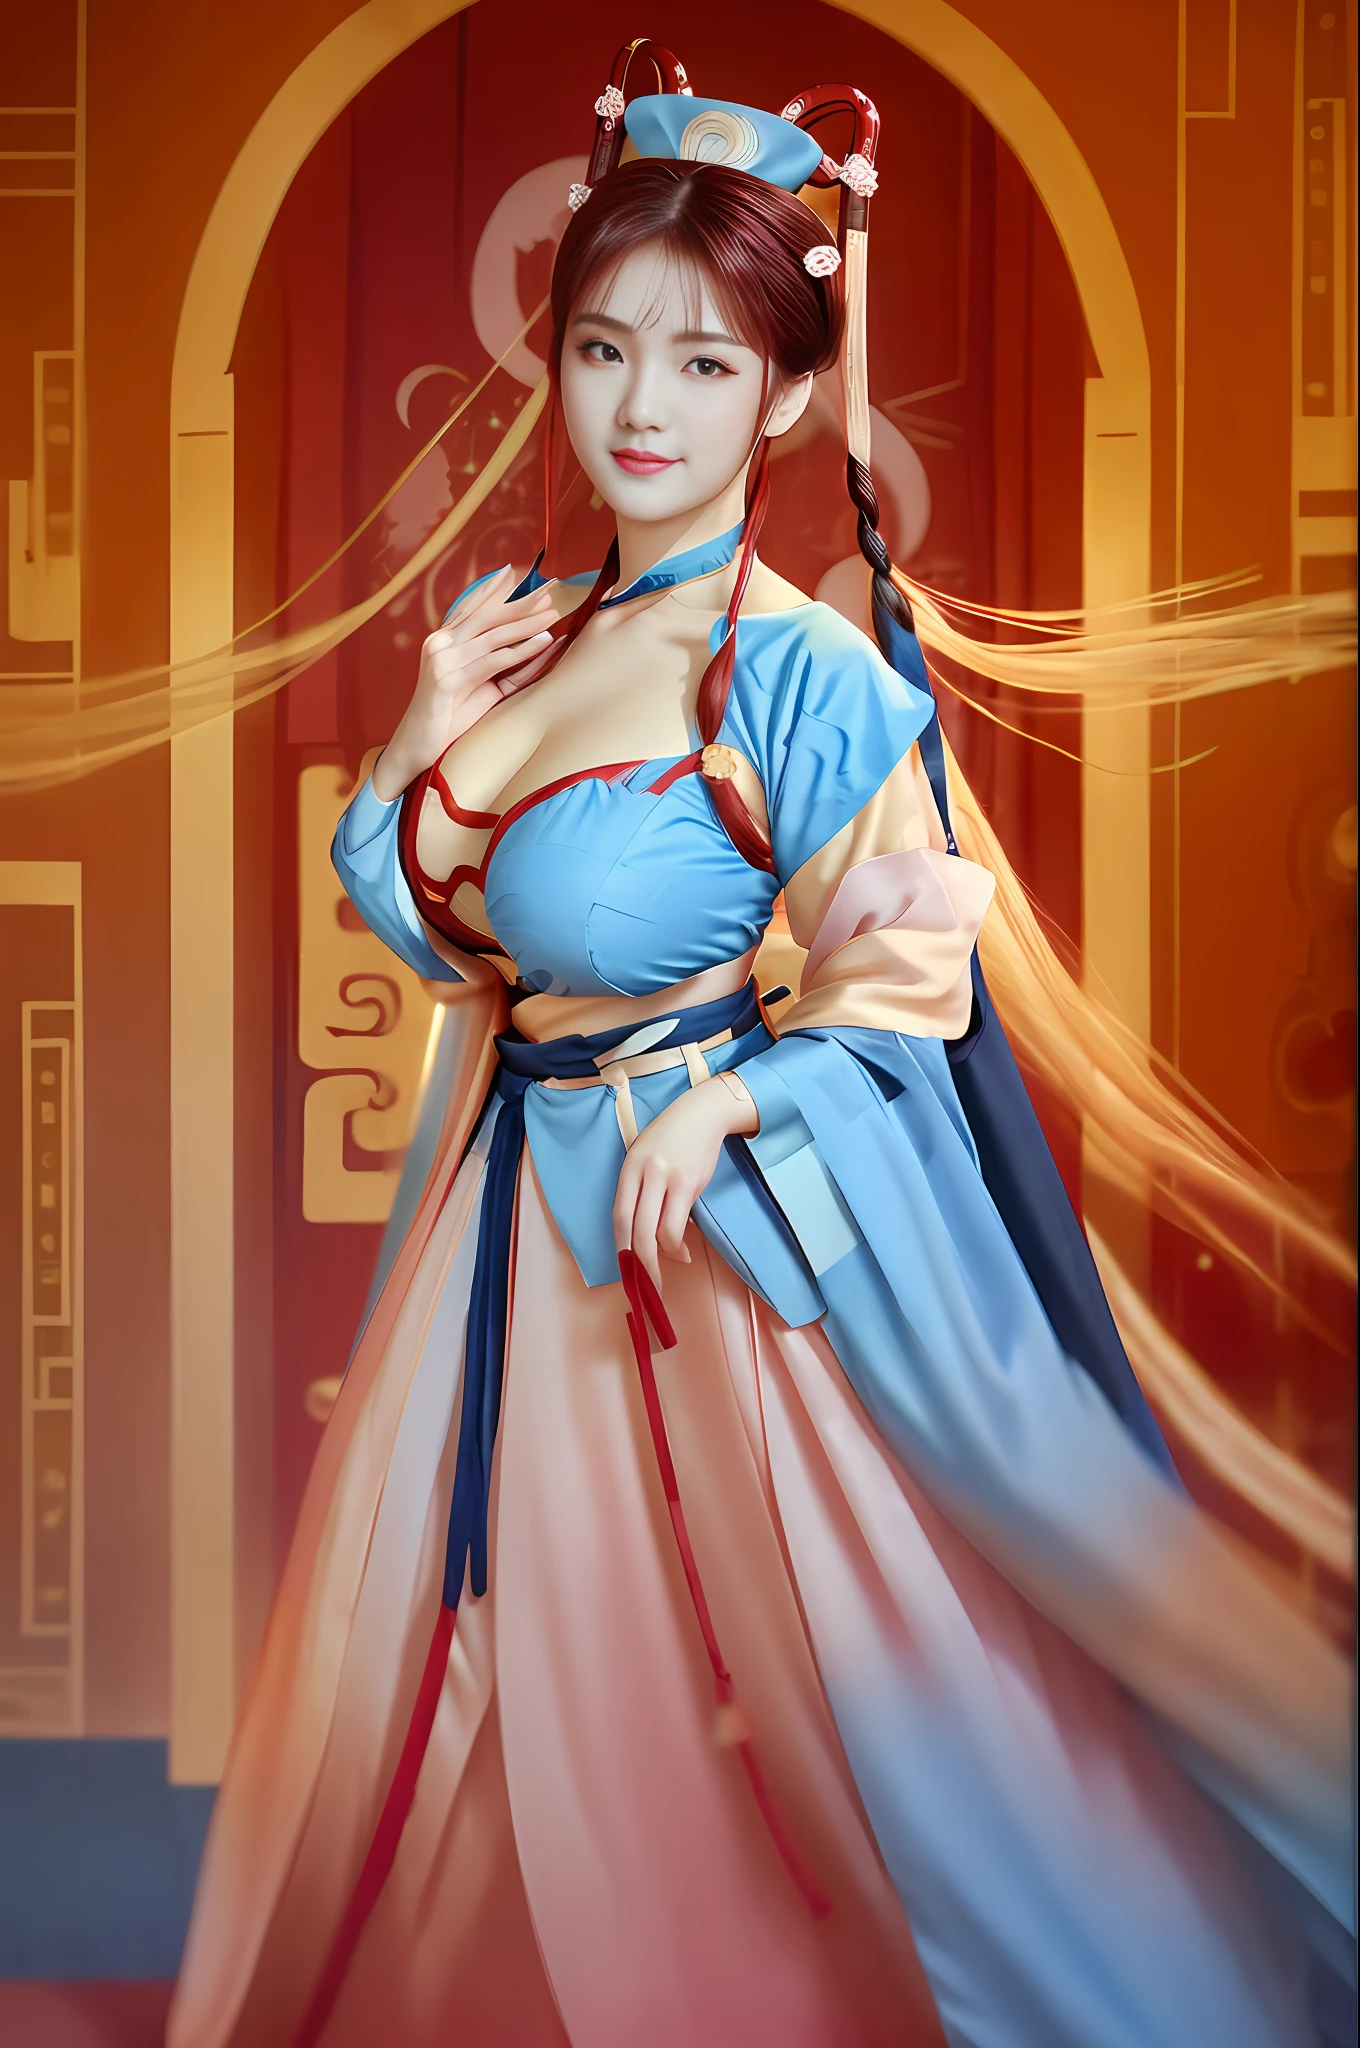 ((wide shot)), (full body), 1 girl, [(blue ru_qun:1.4):(hanfu:1.4):0.2], (huge  under clothes), beautiful face, pink cheeks, pretty lips, perfect face, perfect eyes, perfect nose, perfect mouth, highly detailed, comprehensive cinematic, Detailed digital painting, pearl skin, black choker, red hair ornament , white detail dress , (blue obi:1.4), (very beautiful detailed face), joyful mood, detailed eyes, thick eyebrows, red eye shadow, sparkling eyes, looking at the viewer, smile, (soft chin: 0.85) , long hair, blunt bangs, braids, golden hair ornaments.